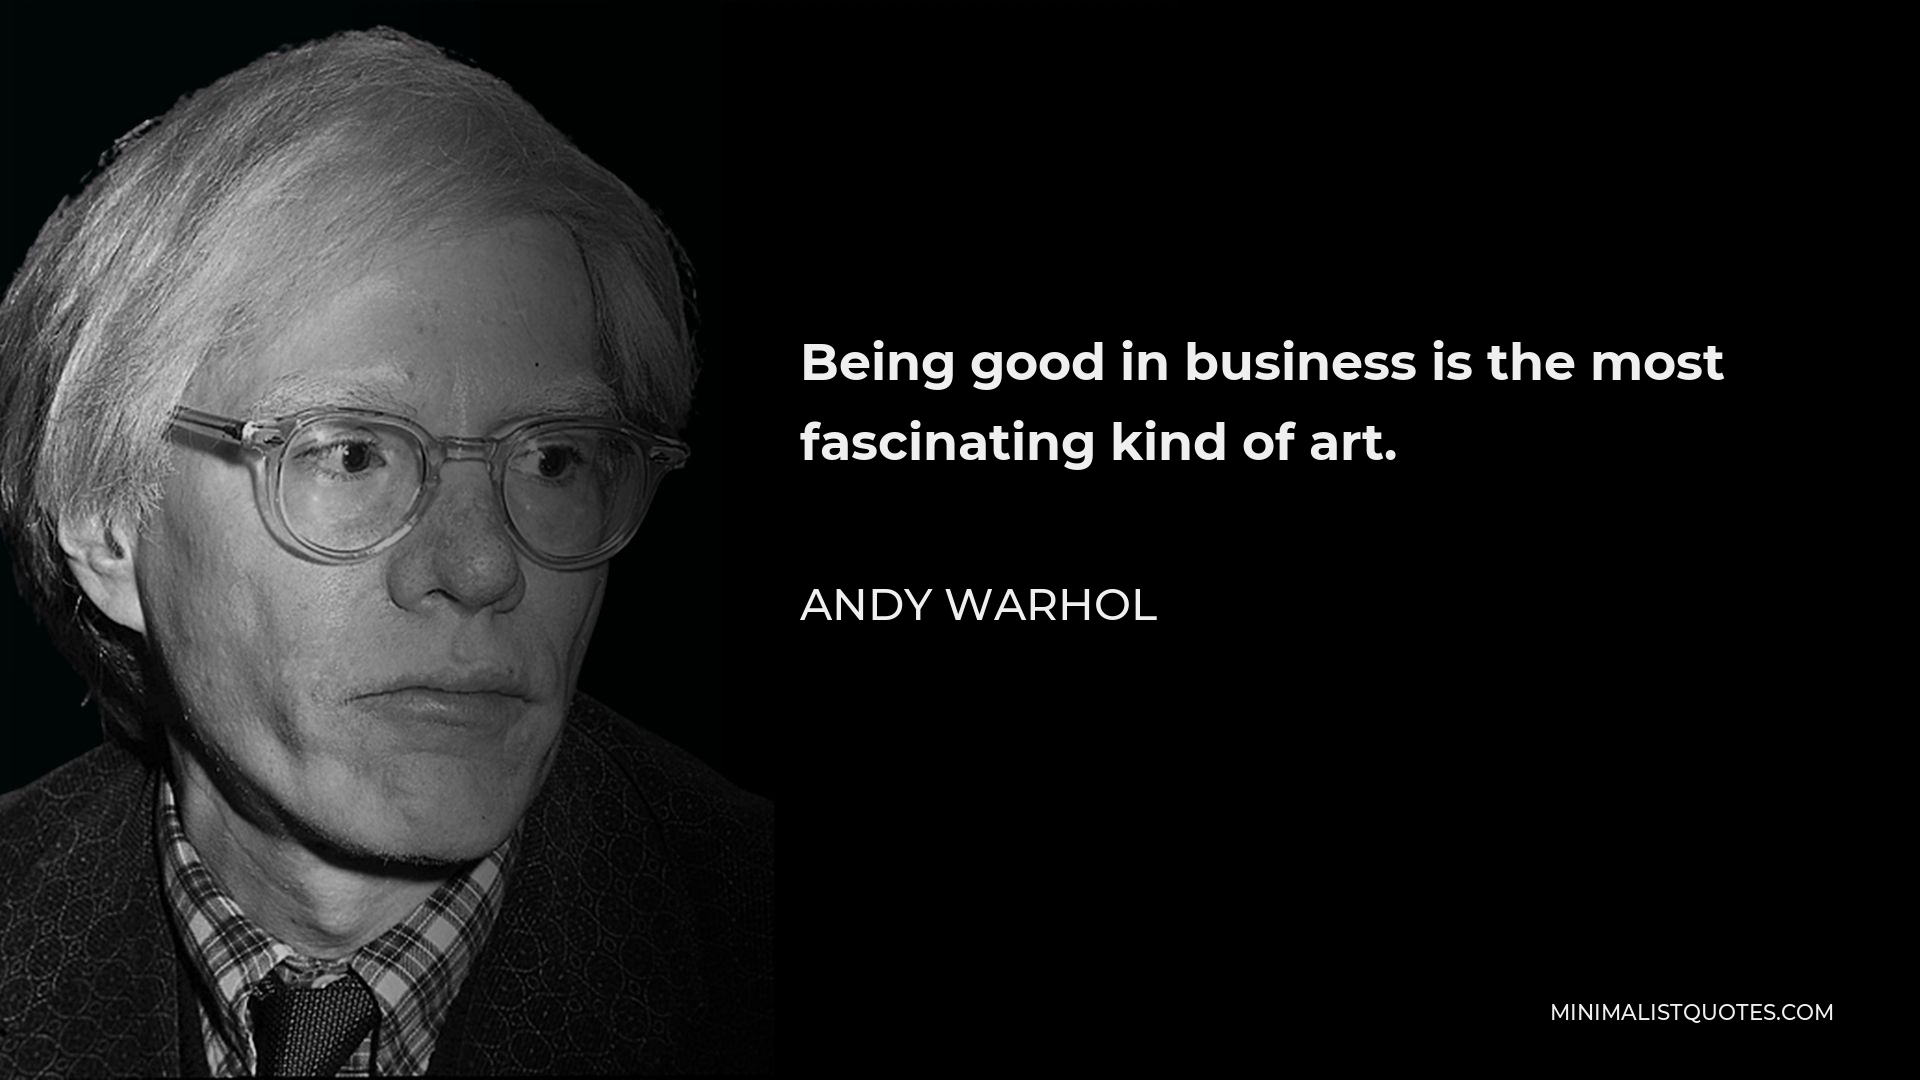 Andy Warhol Quote - Being good in business is the most fascinating kind of art.